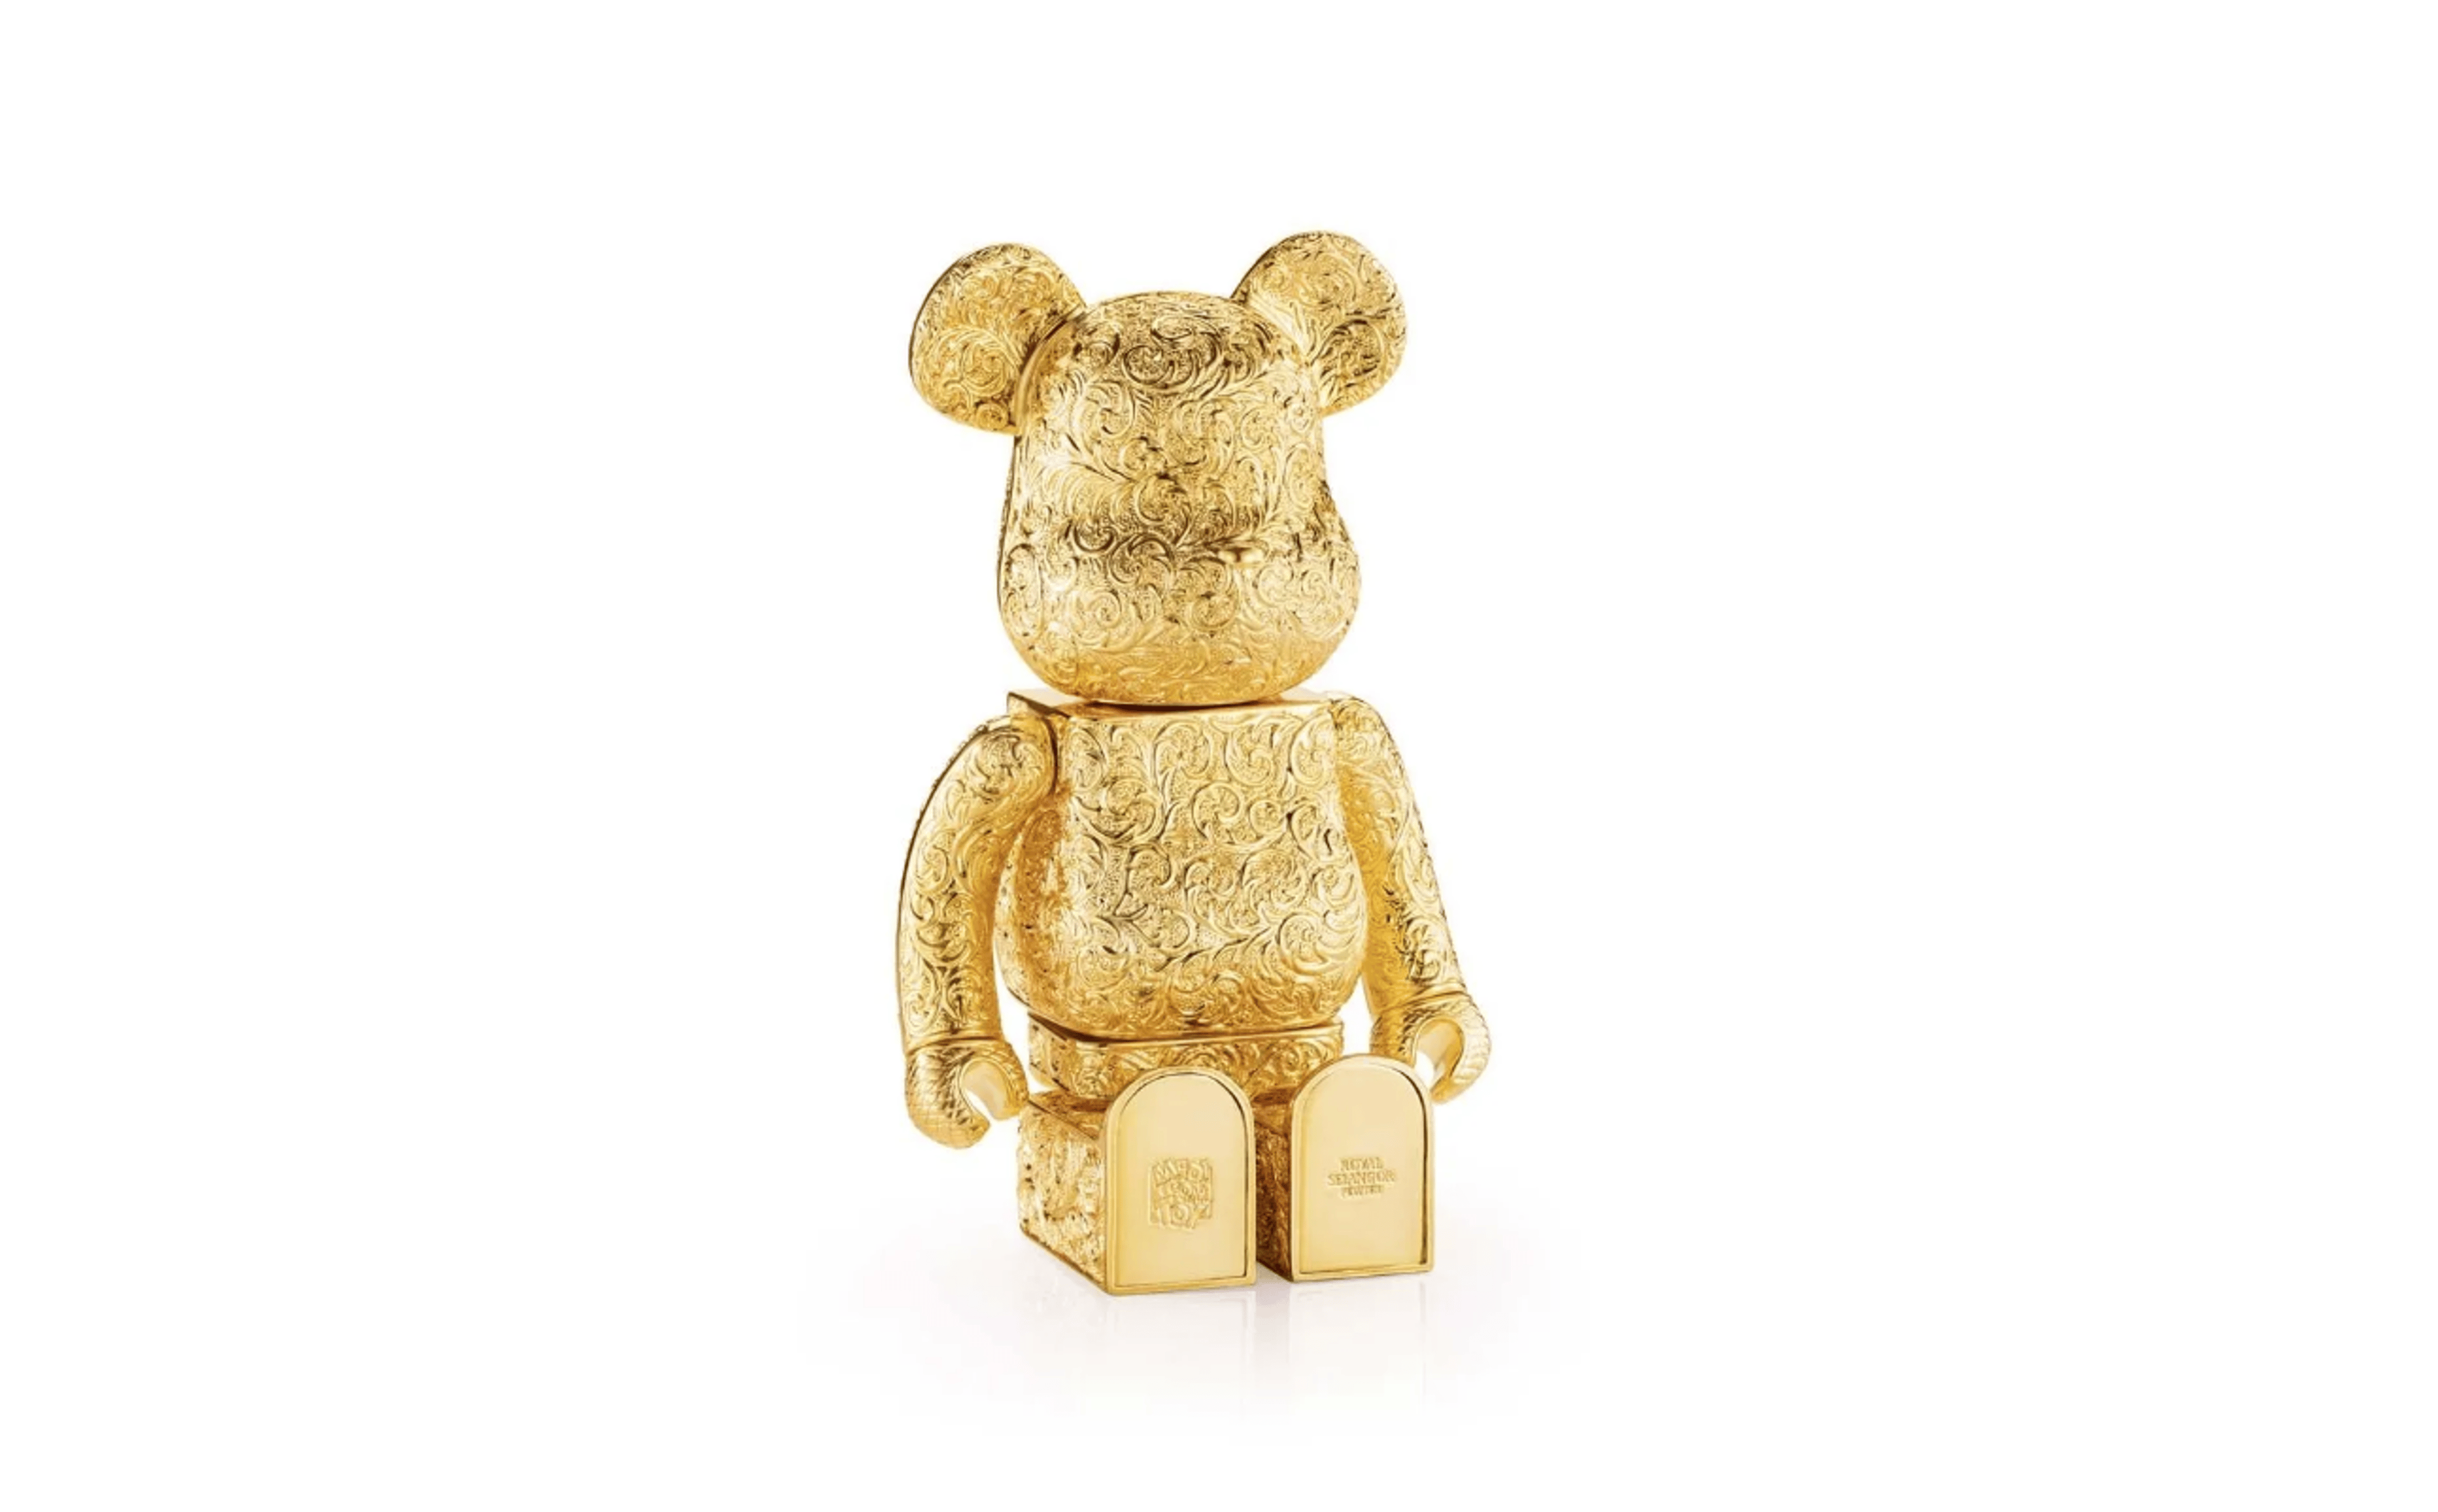 Alternate View 4 of Special Edition Arabesque Golden BE@RBRICK ROYAL SELANGOR